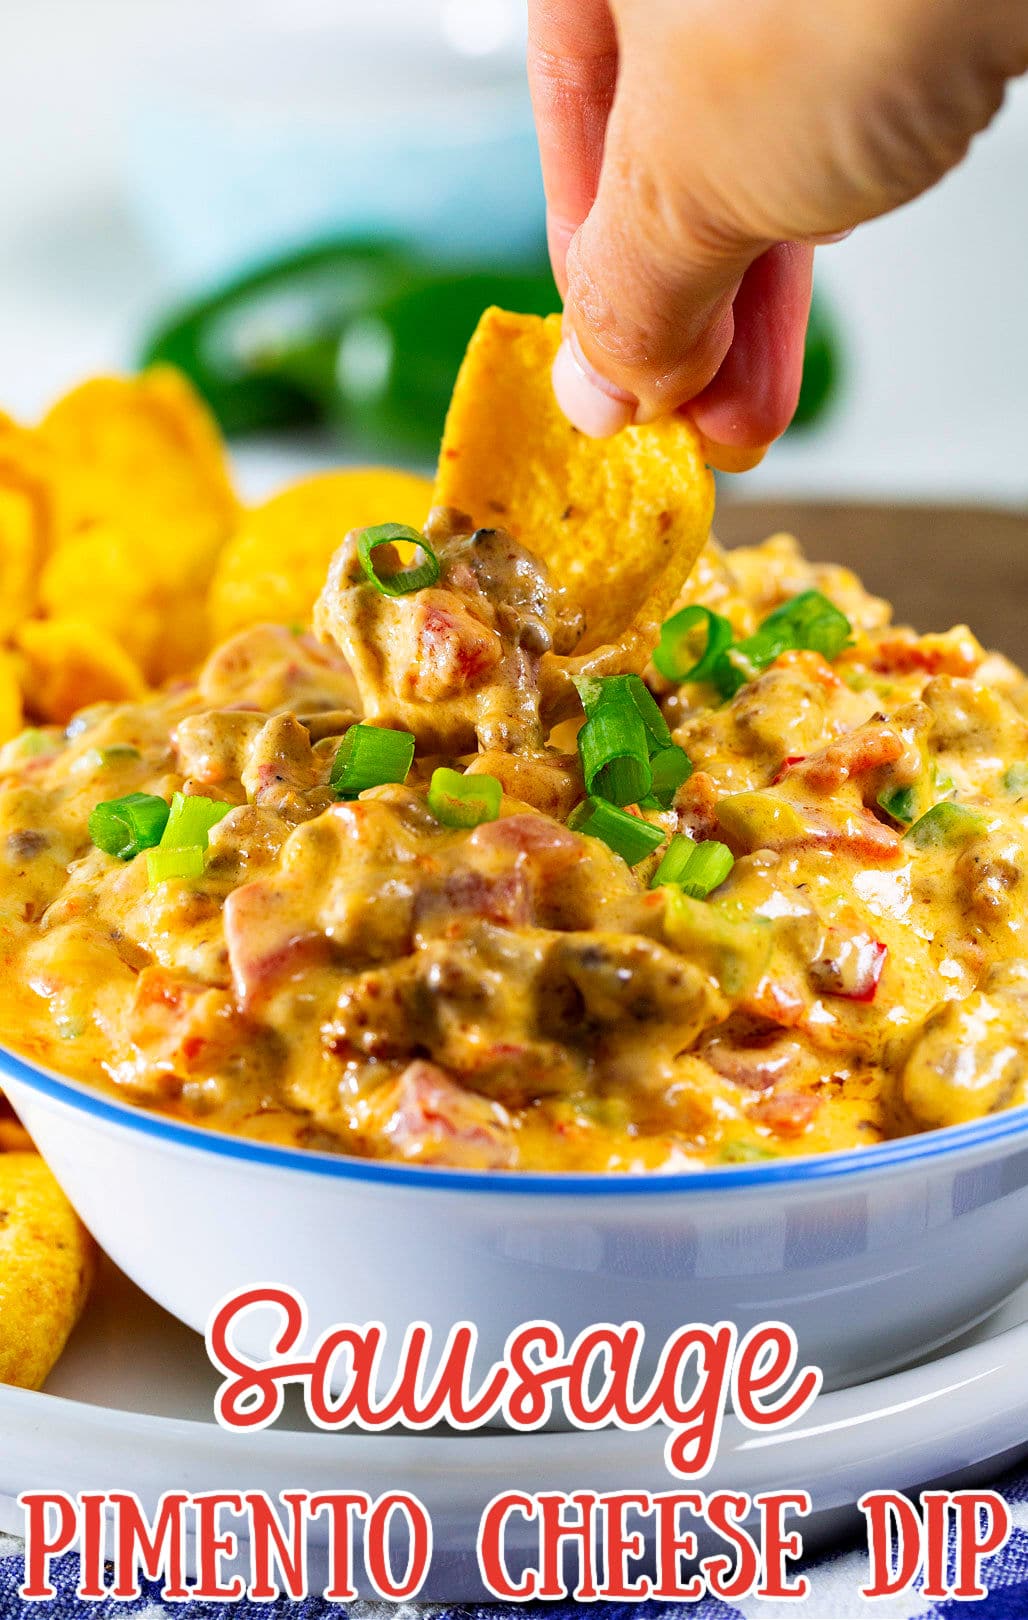 Corn Chip scooping up Pimento Cheese Dip.